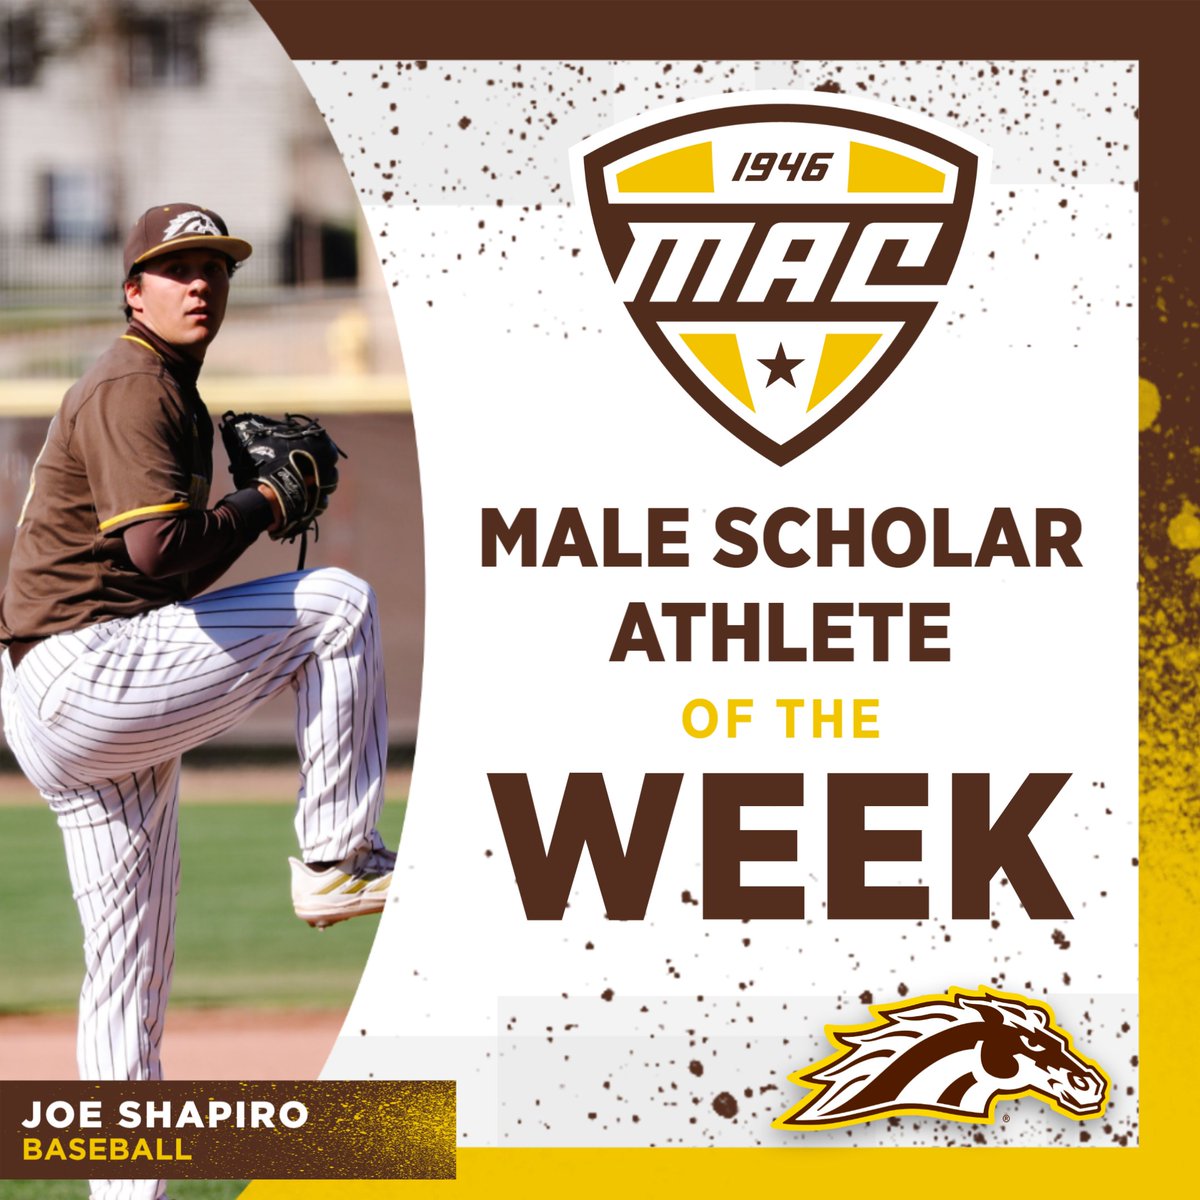 Congratulations to Joe Shapiro on being named @MACSports Male Scholar Athlete of the Week! 📰 buff.ly/3QDlzGG #BroncosReign